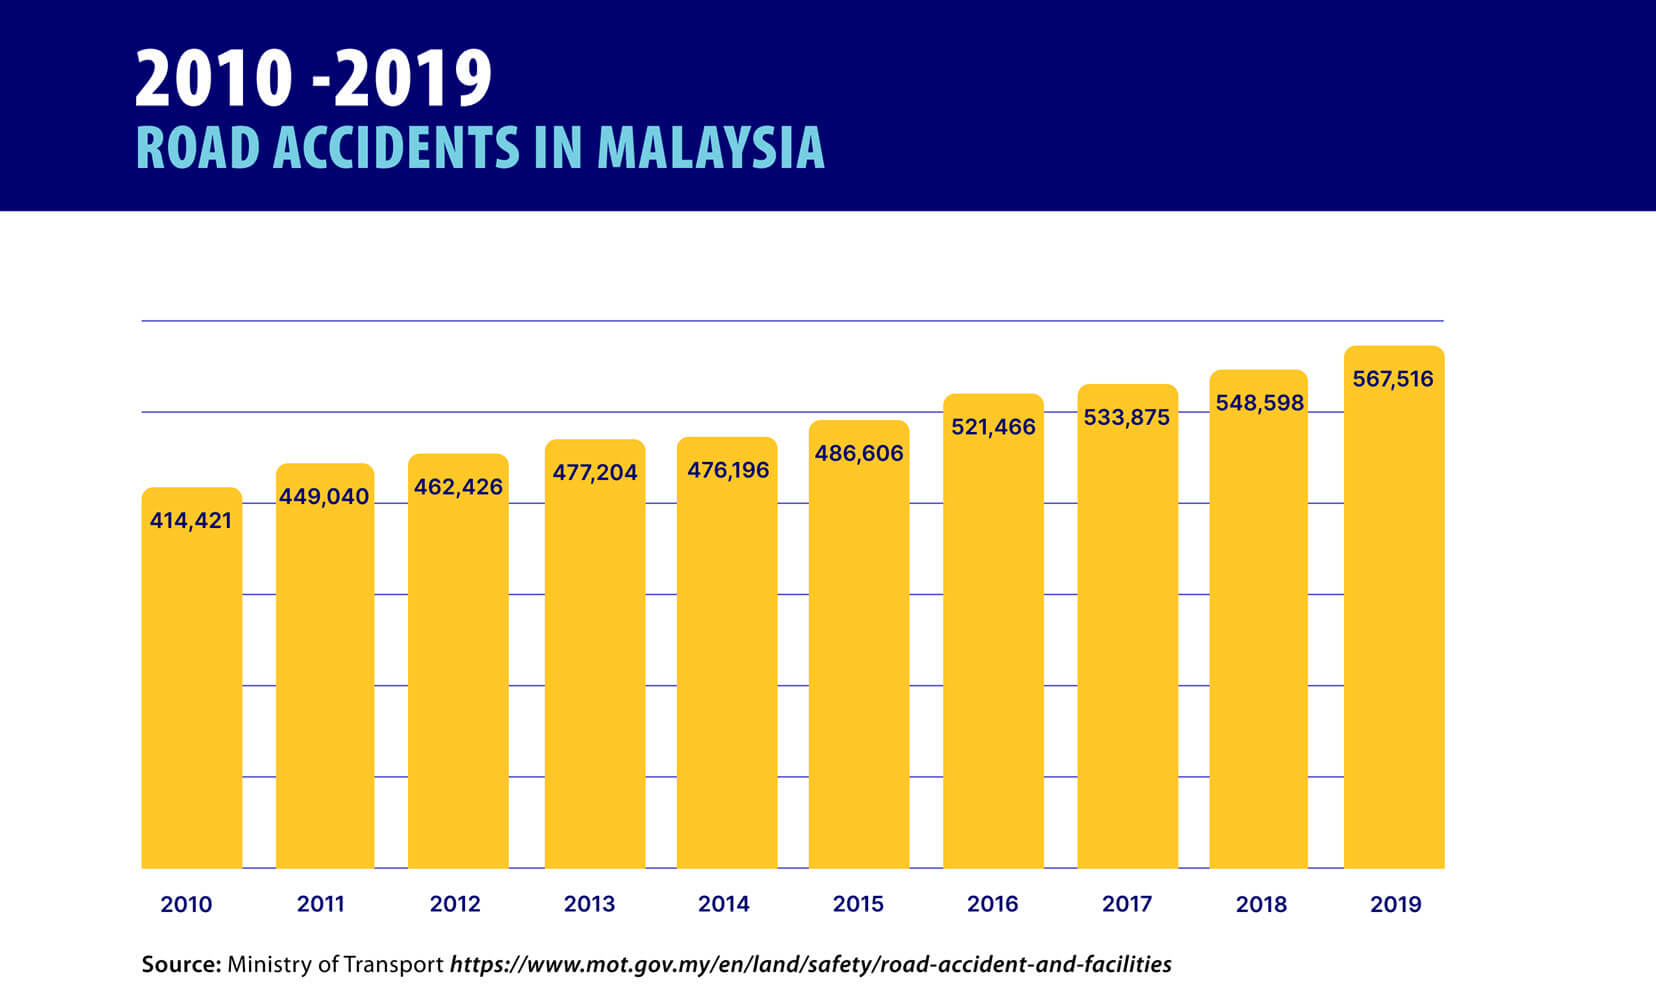 Malaysian road accidents statistics from 2010 to 2019